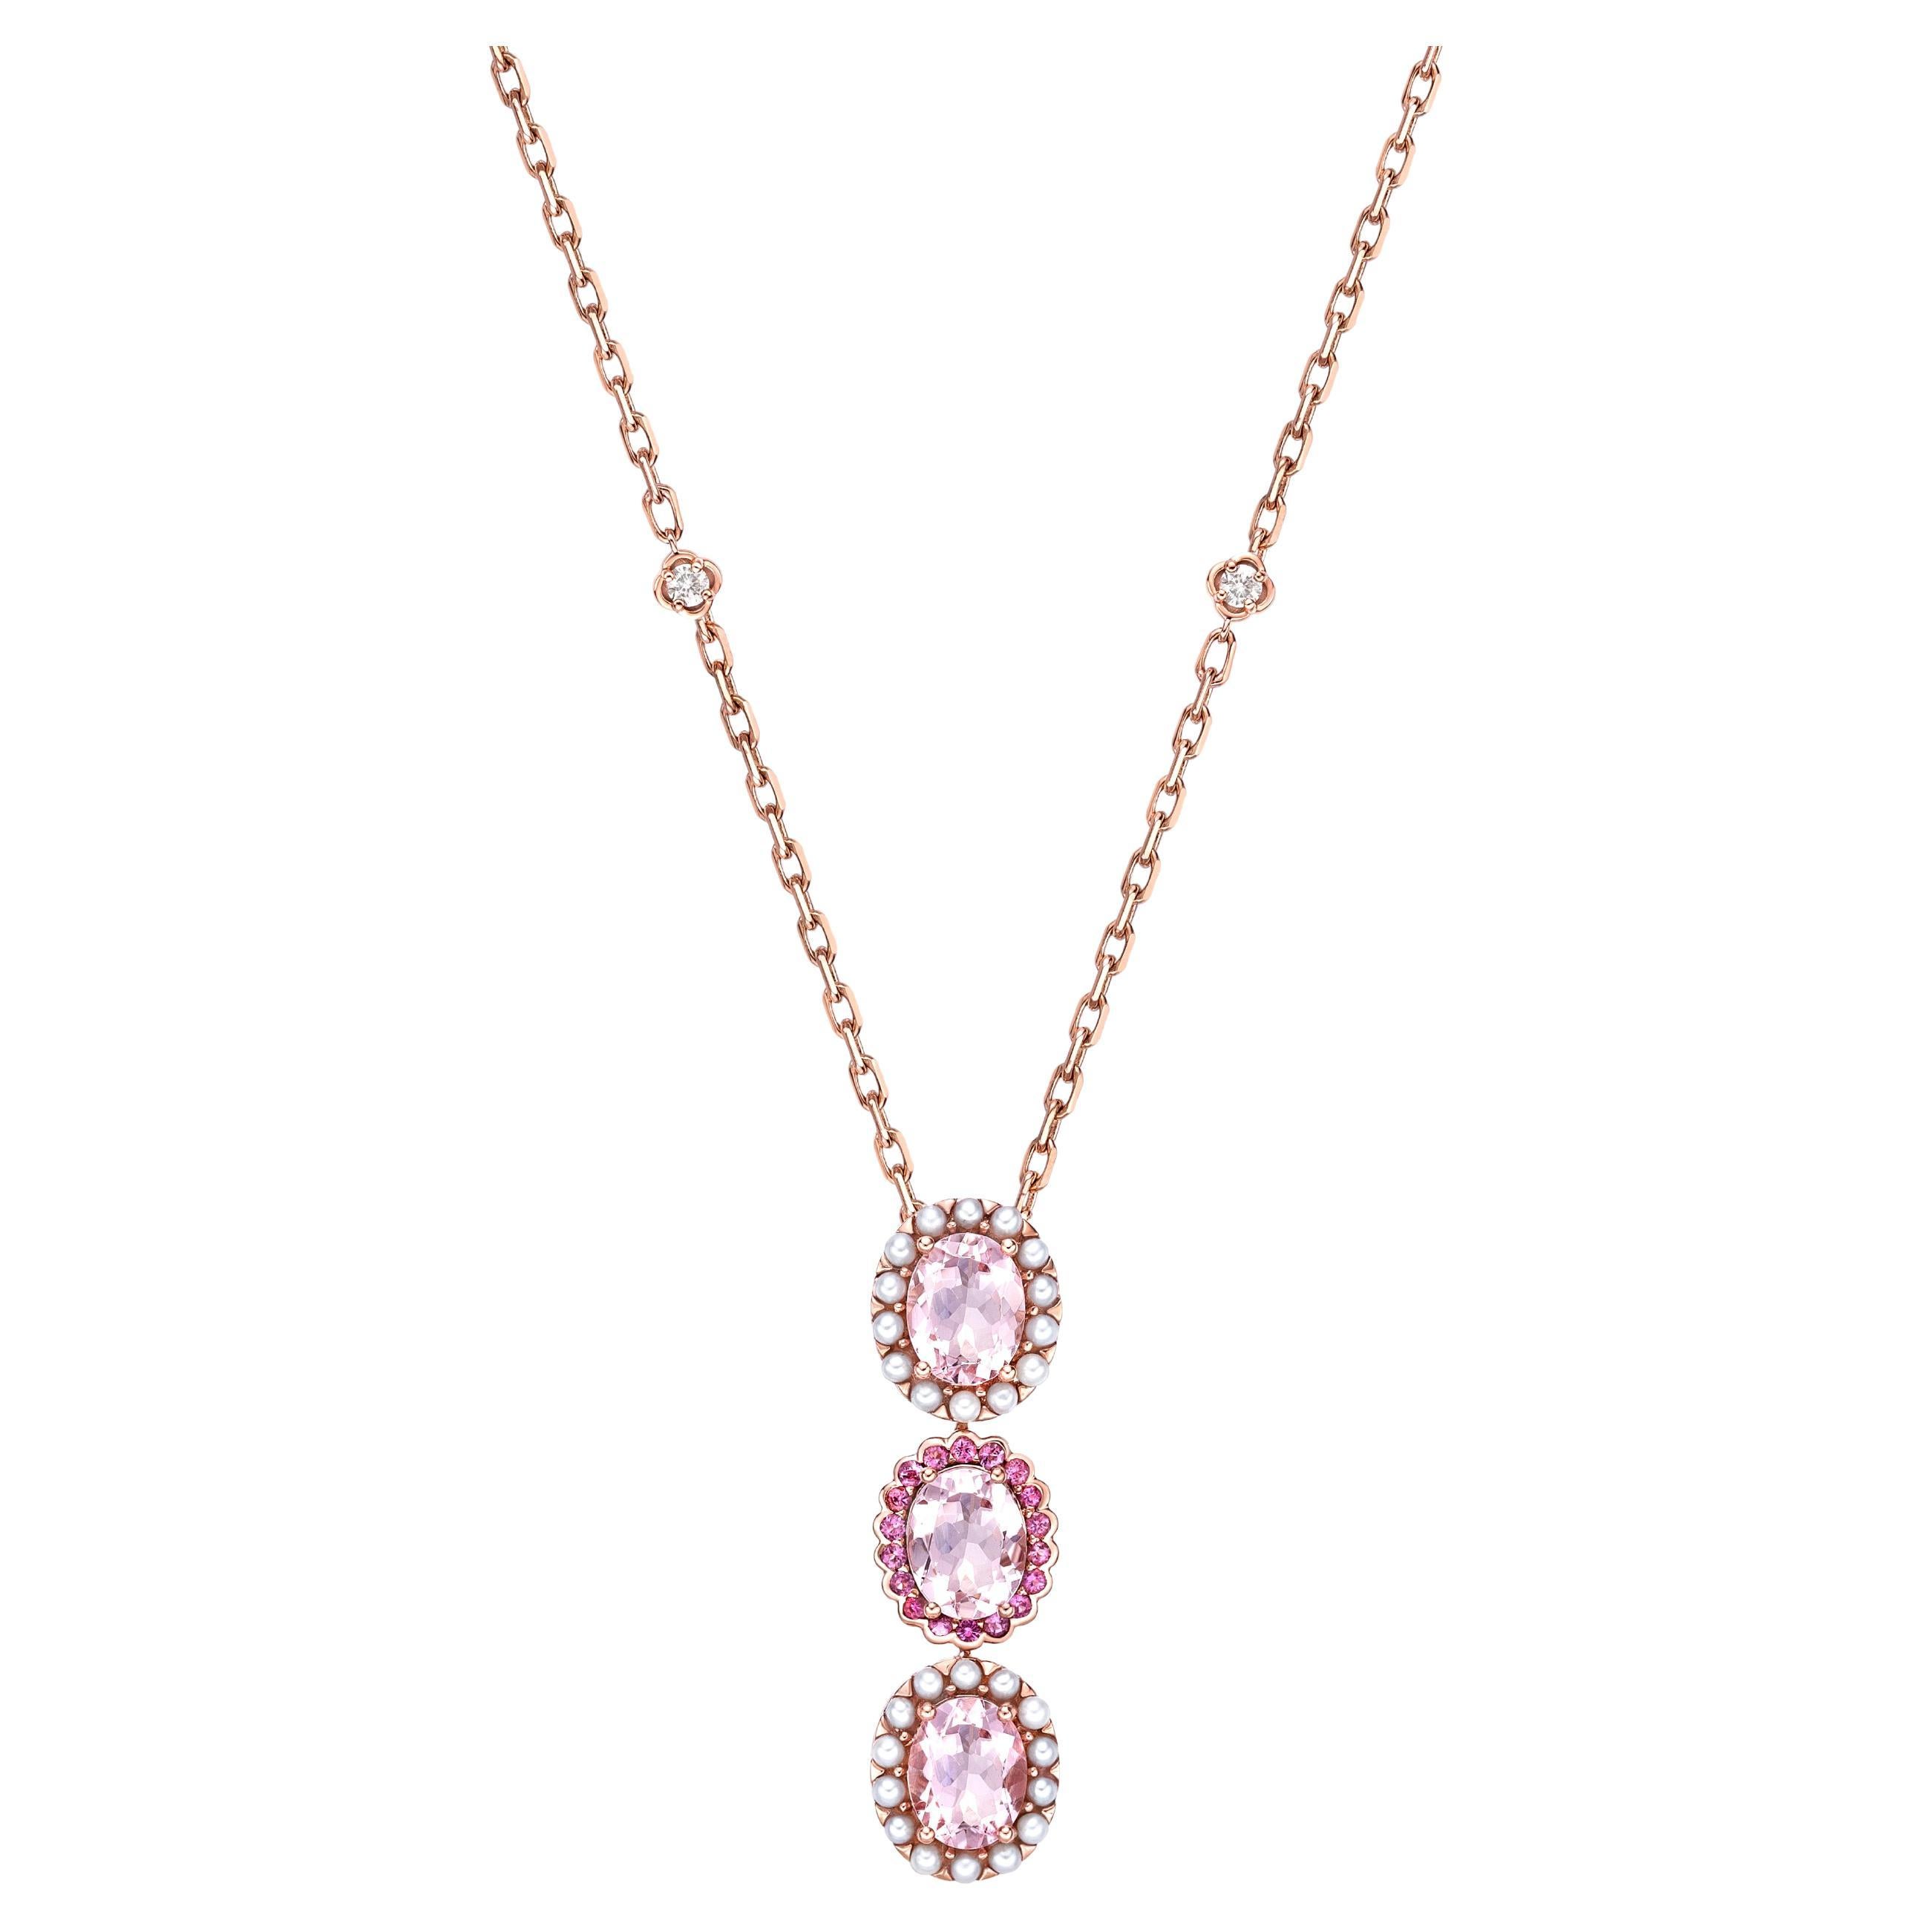 Pink Morganite Pendant Necklace with Tourmaline, Pearl & Diamond in 18KRG.